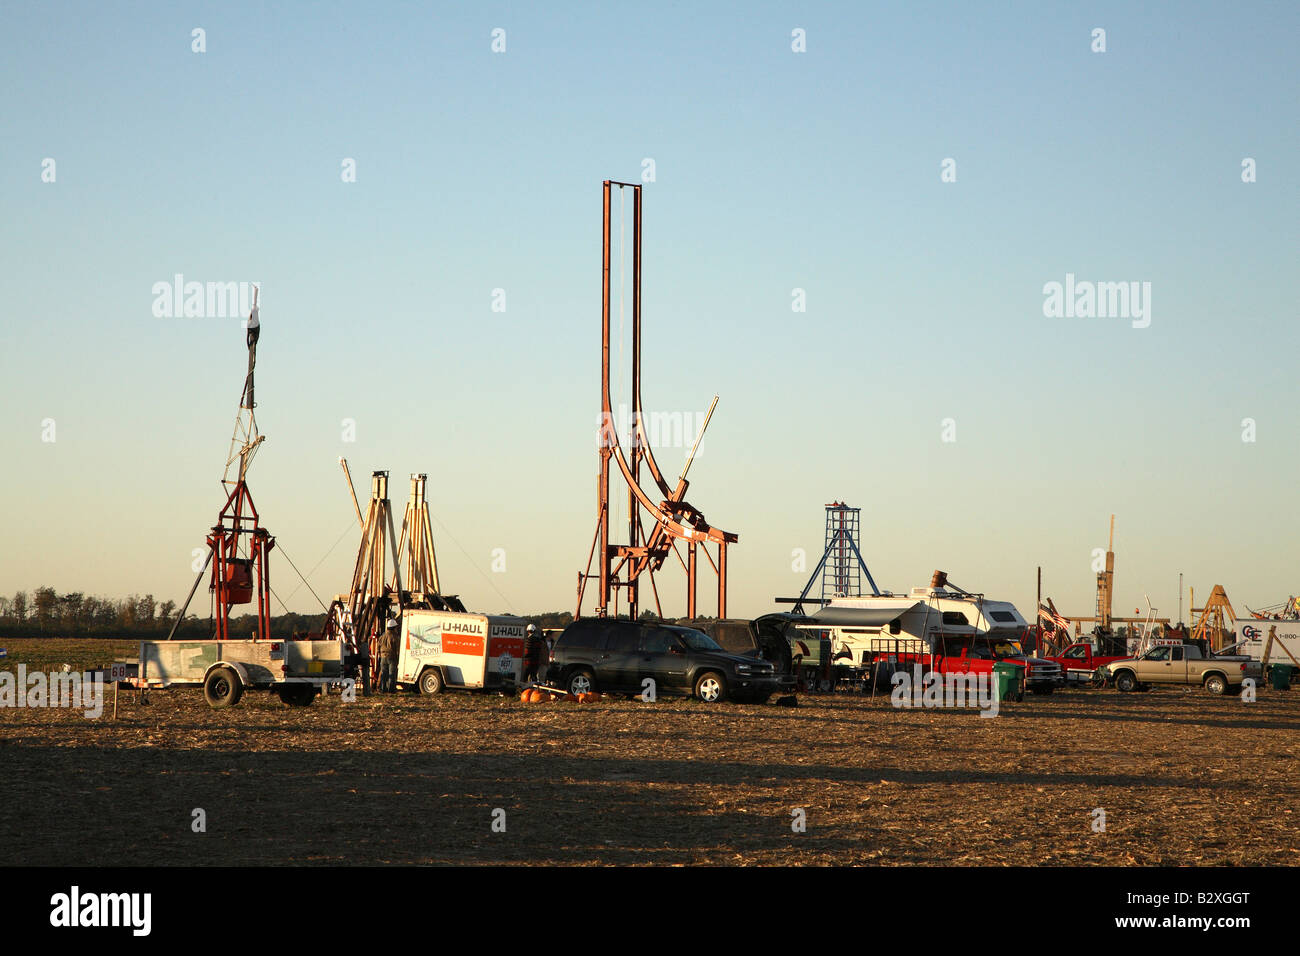 Line of trebuchets and catapult machines with support vehicles at the base. Stock Photo